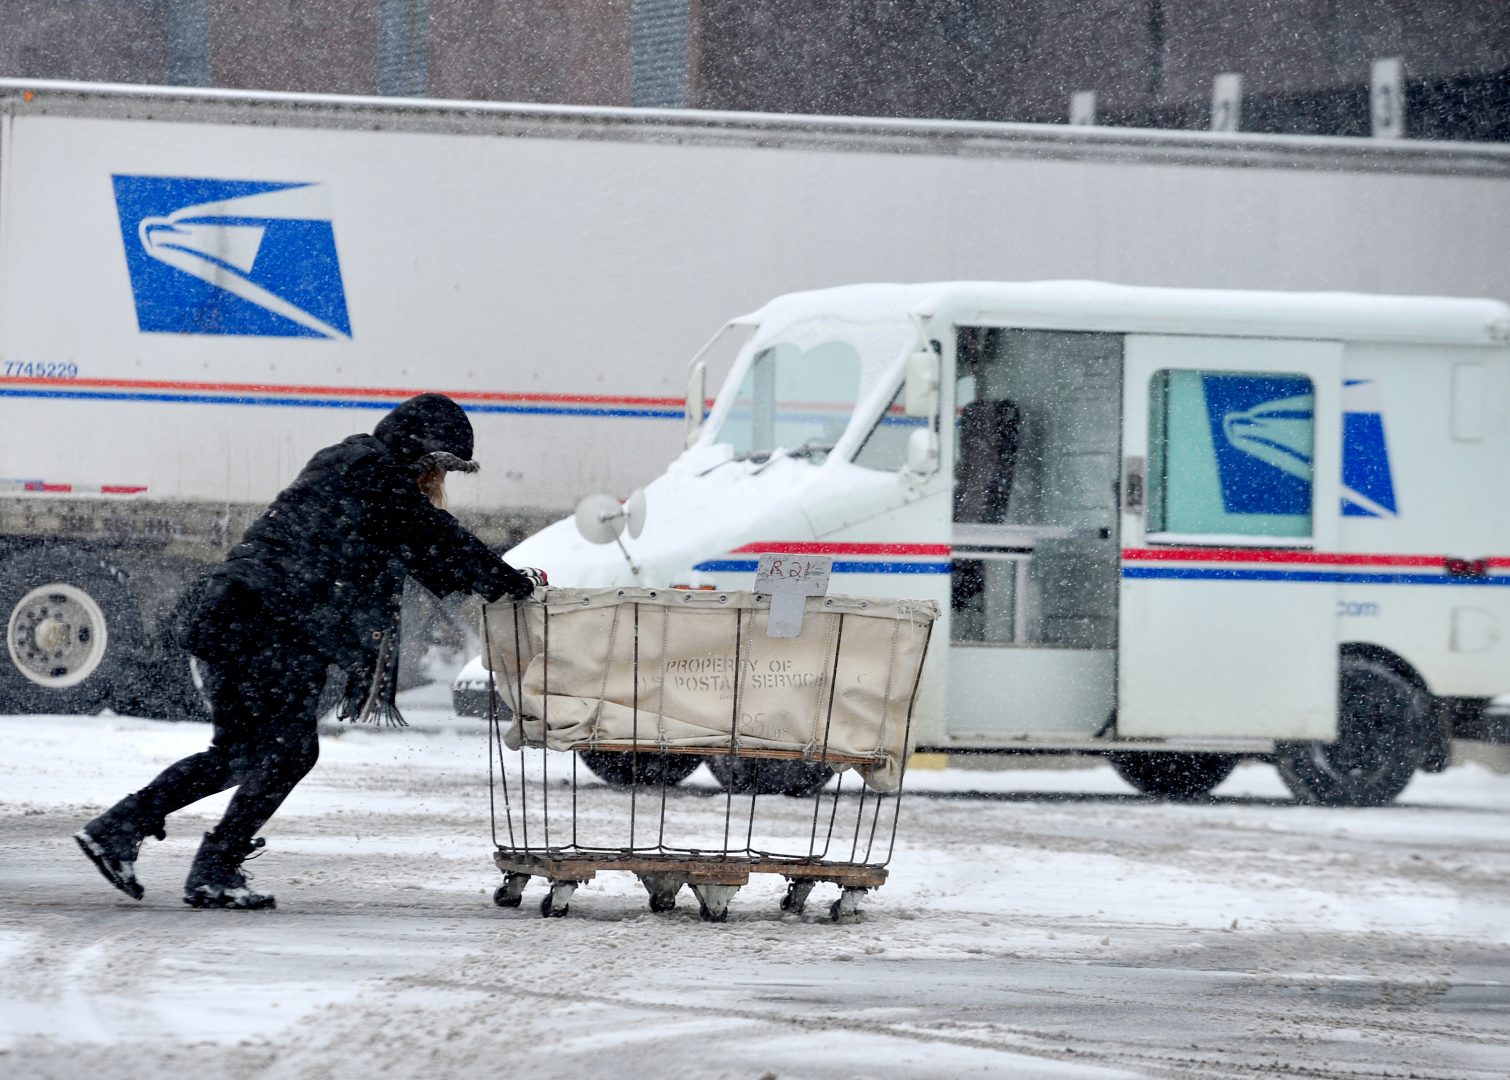 FILE PHOTO: USPS carrier Stephanie Starr pushes a mail cart from her carrier vehicle to the loading dock area of the Columbus, Ind. Post Office, Tuesday, Feb. 9, 2010. Starr said that although she is used to delivering in inclement weather, her rural route takes about two hours longer to complete when there is heavy snow.